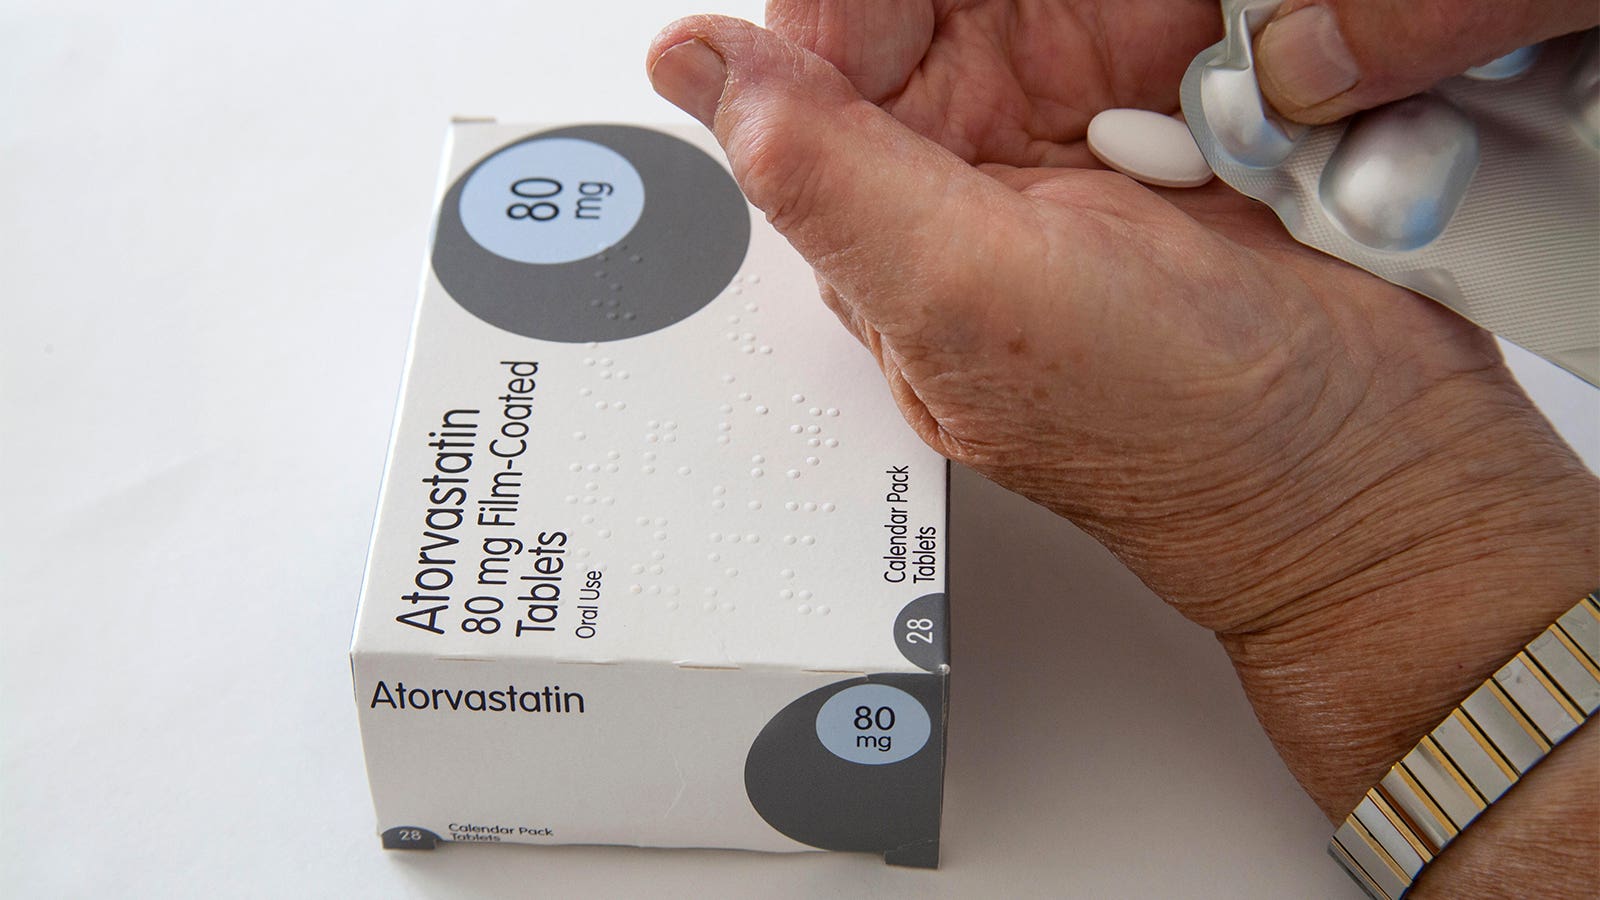 A photo of a woman pushing an atorvastatin tablet from its blisterpack.